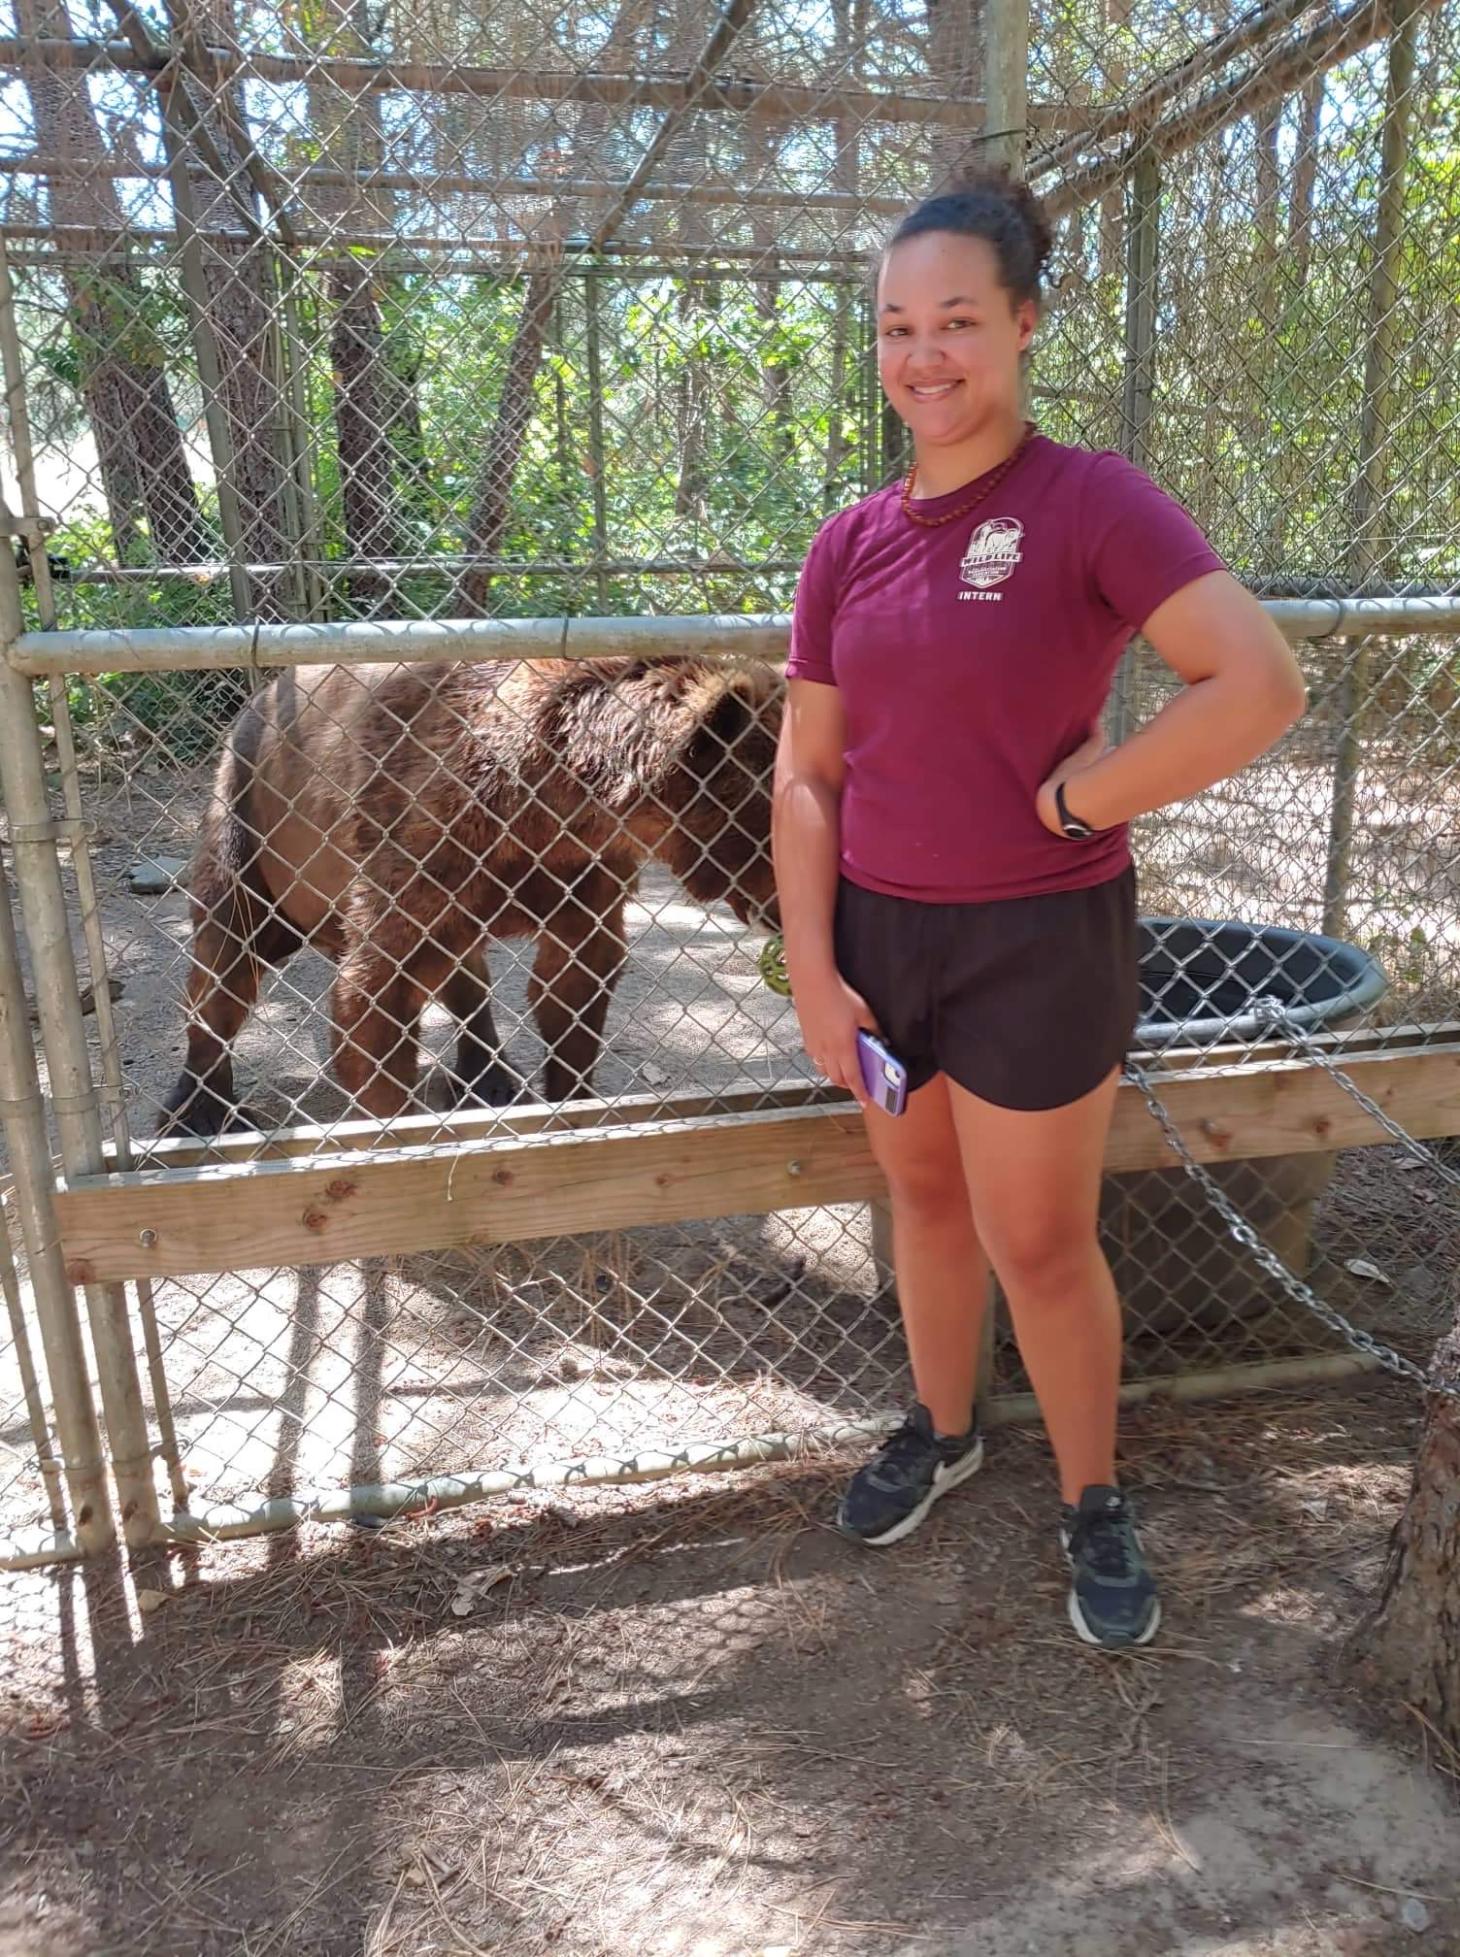 Camrie poses in front of a brown bear's enclosure at Wildlife Images Rehabilitation Center. She wears a Wildlife Images Tshirt and smiles broadly. 